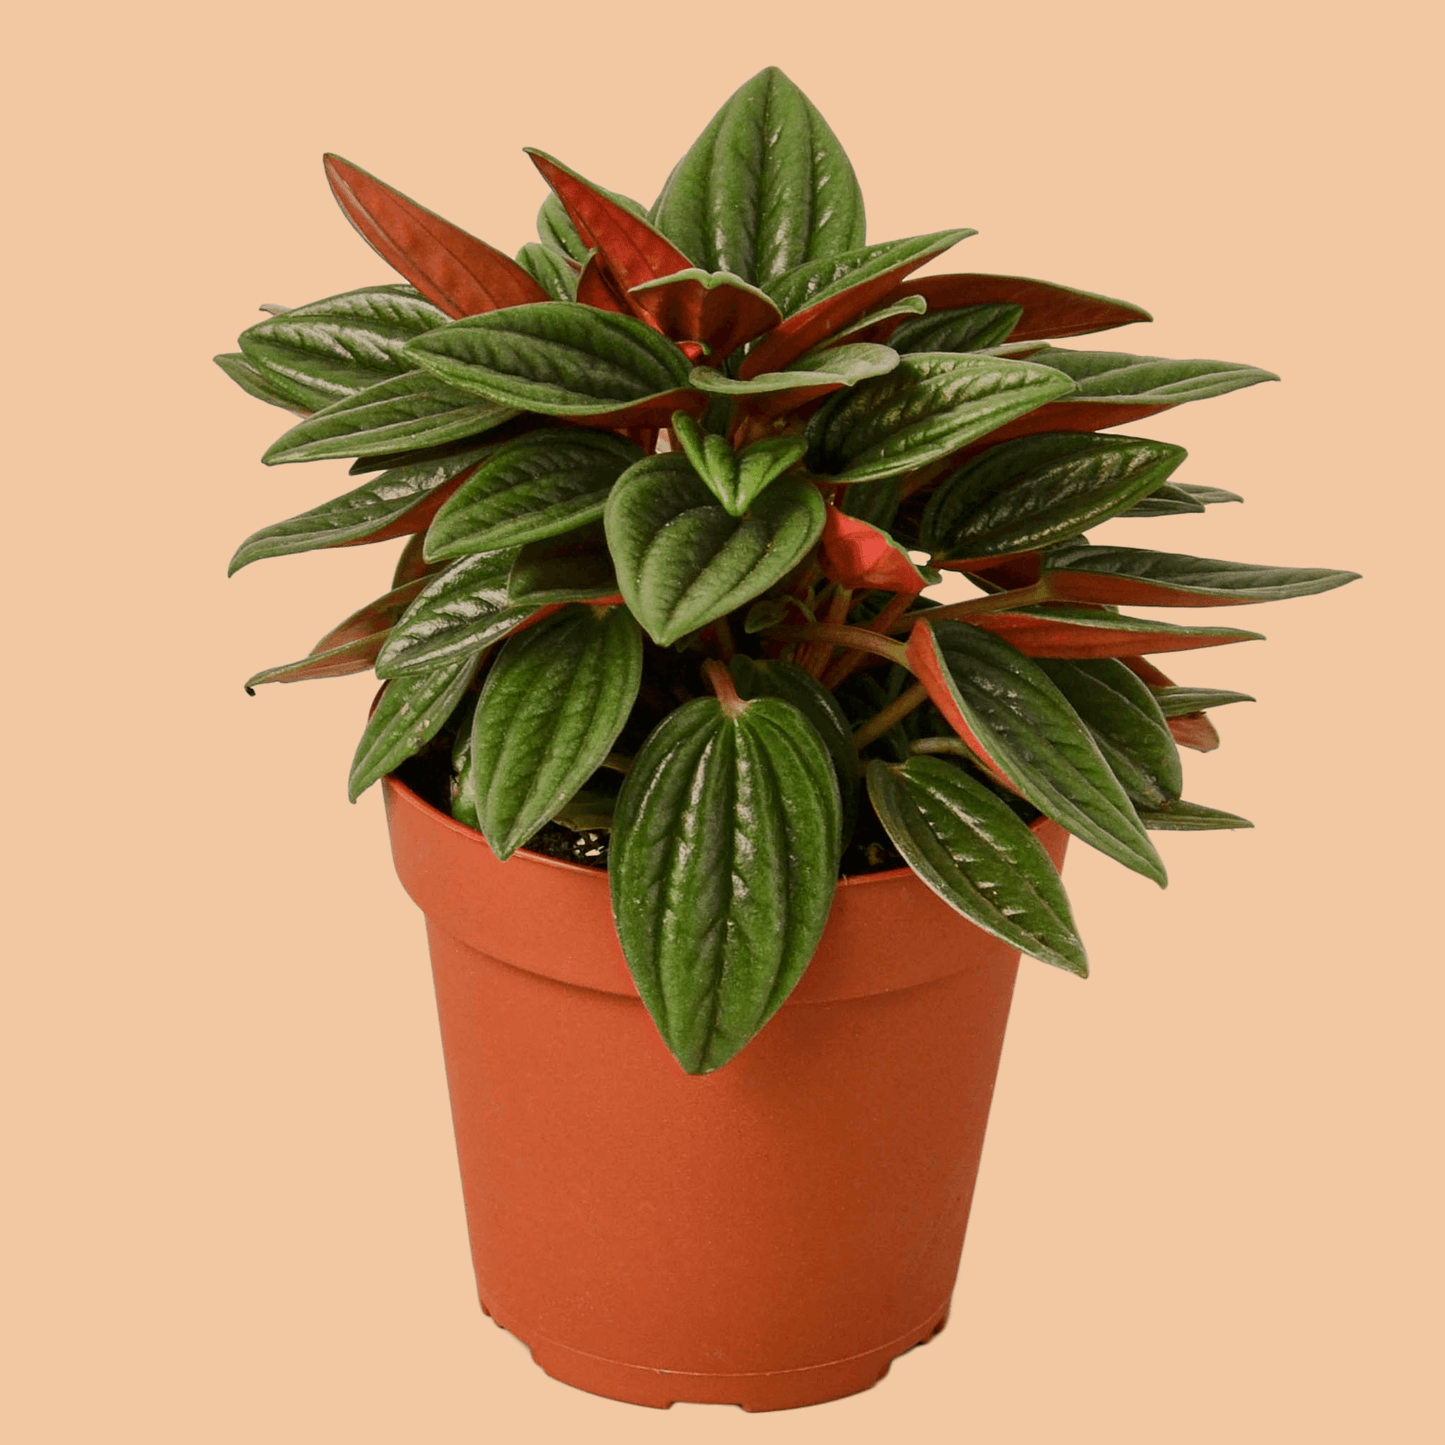 Peperomia Rosso - The Leafy Branch